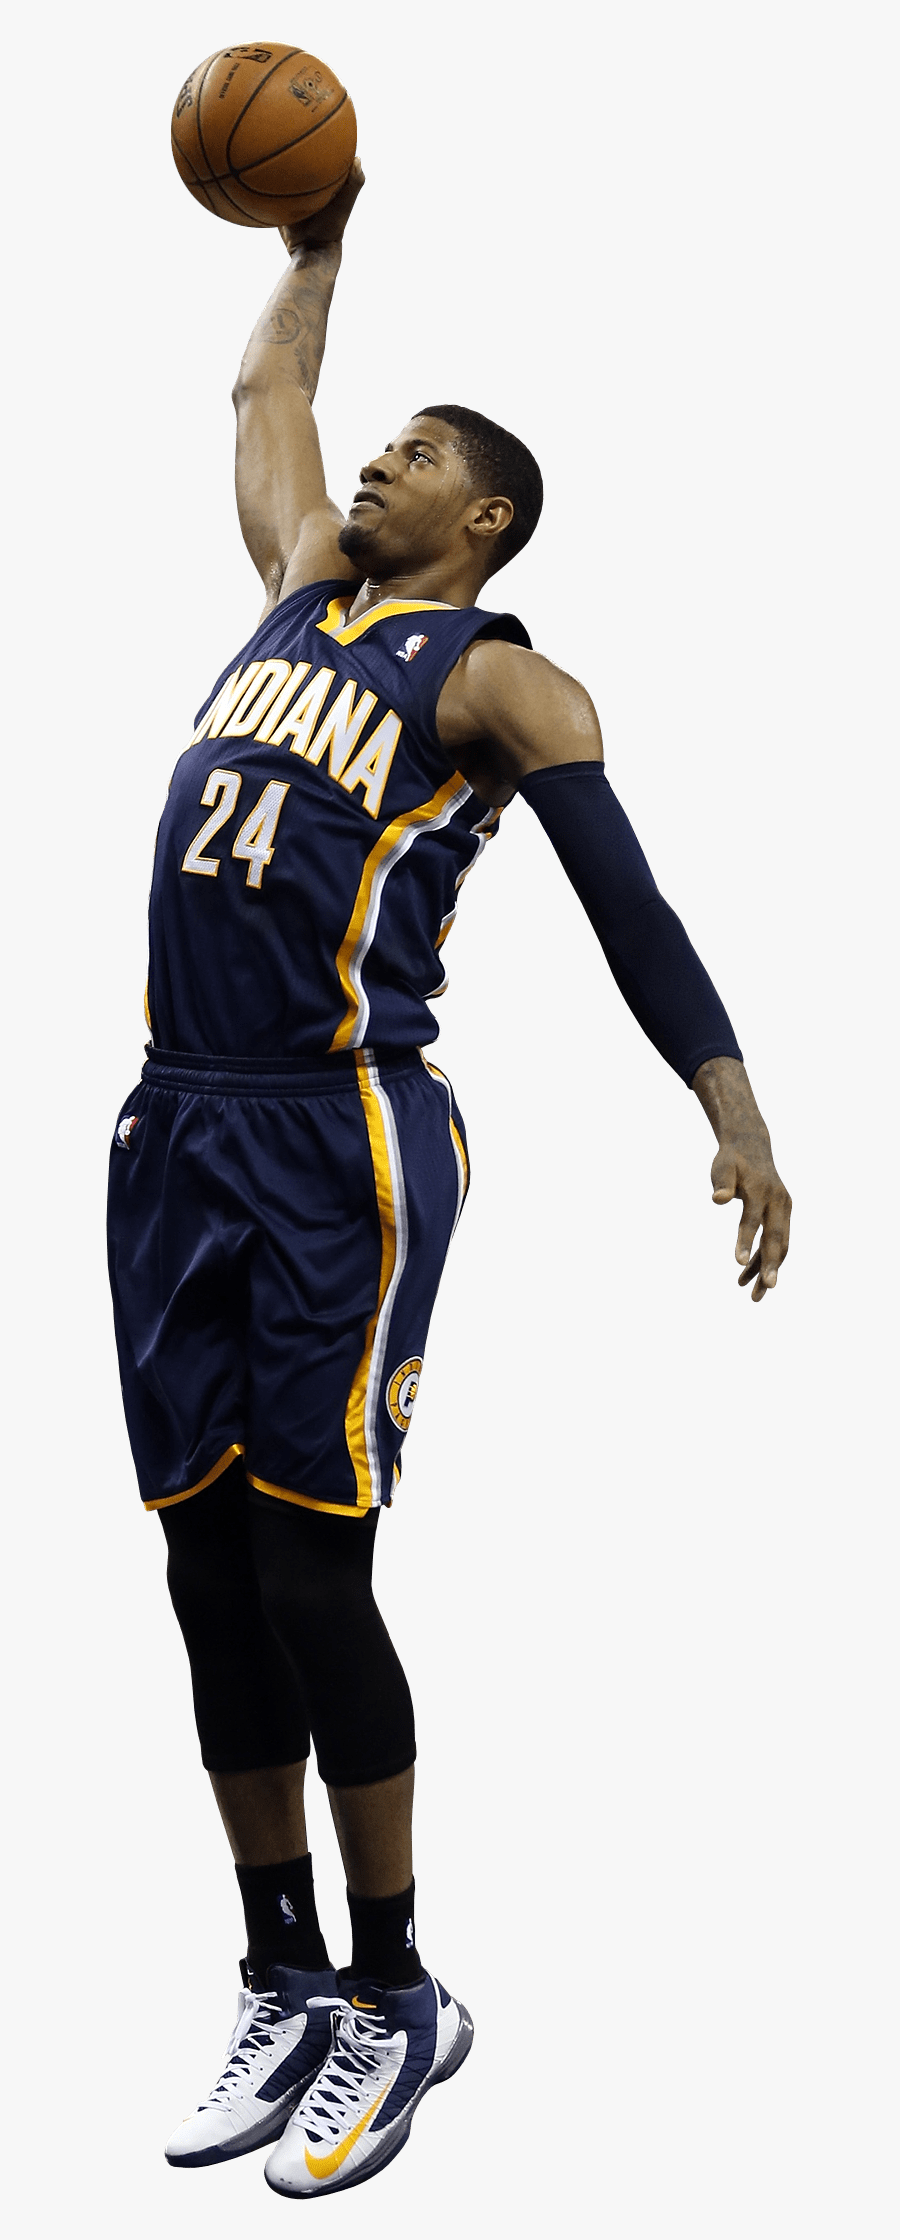 Transparent Basketball Player Dunking Clipart - Paul George Dunk Png, Transparent Clipart